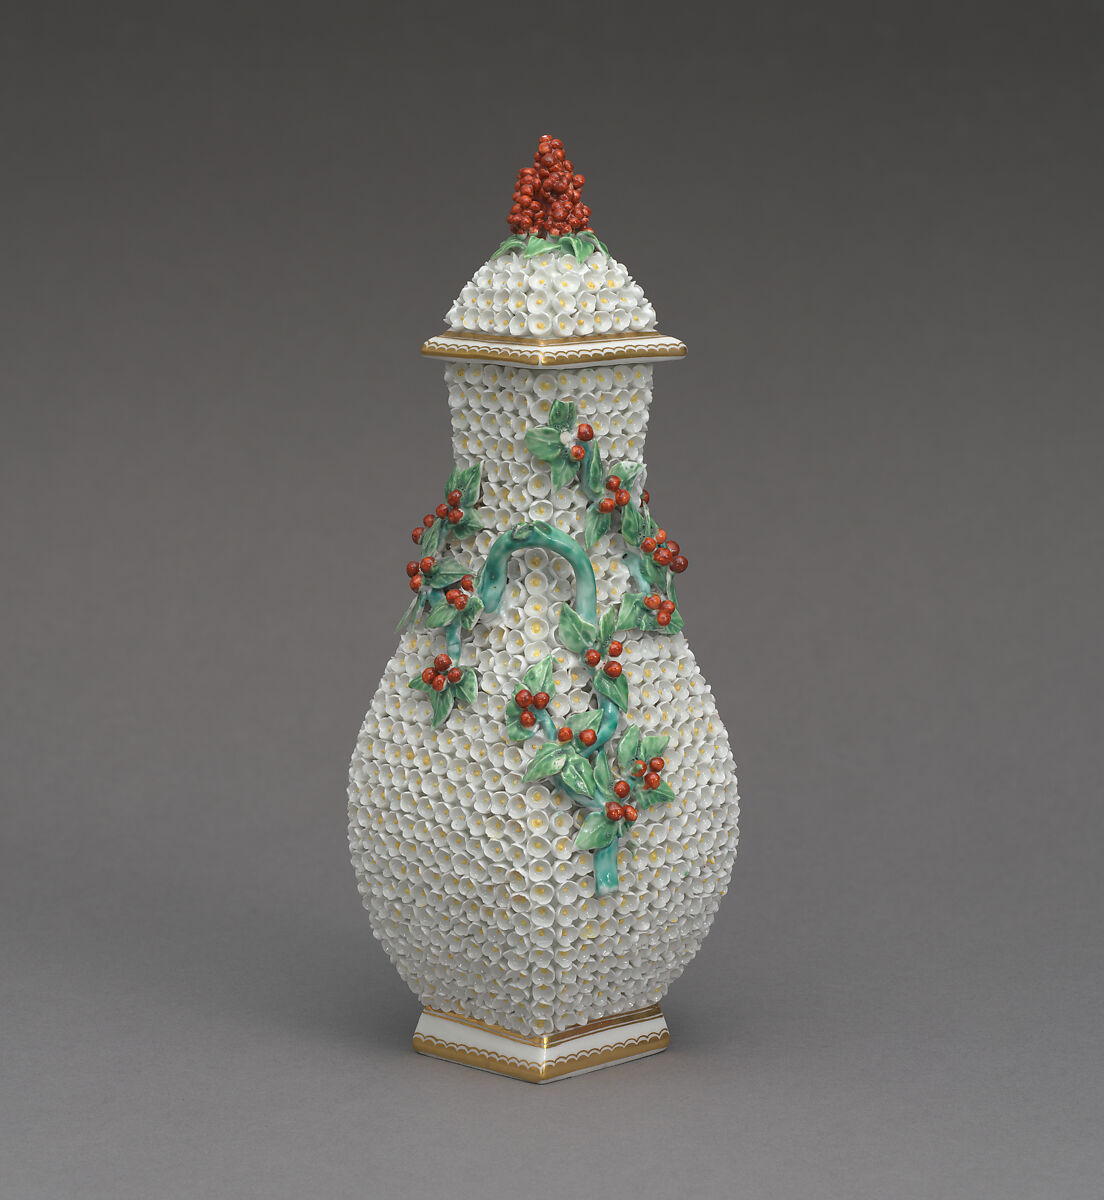 Vase with cover, Chelsea Porcelain Manufactory (British, 1744–1784), Soft-paste porcelain, British, Chelsea 